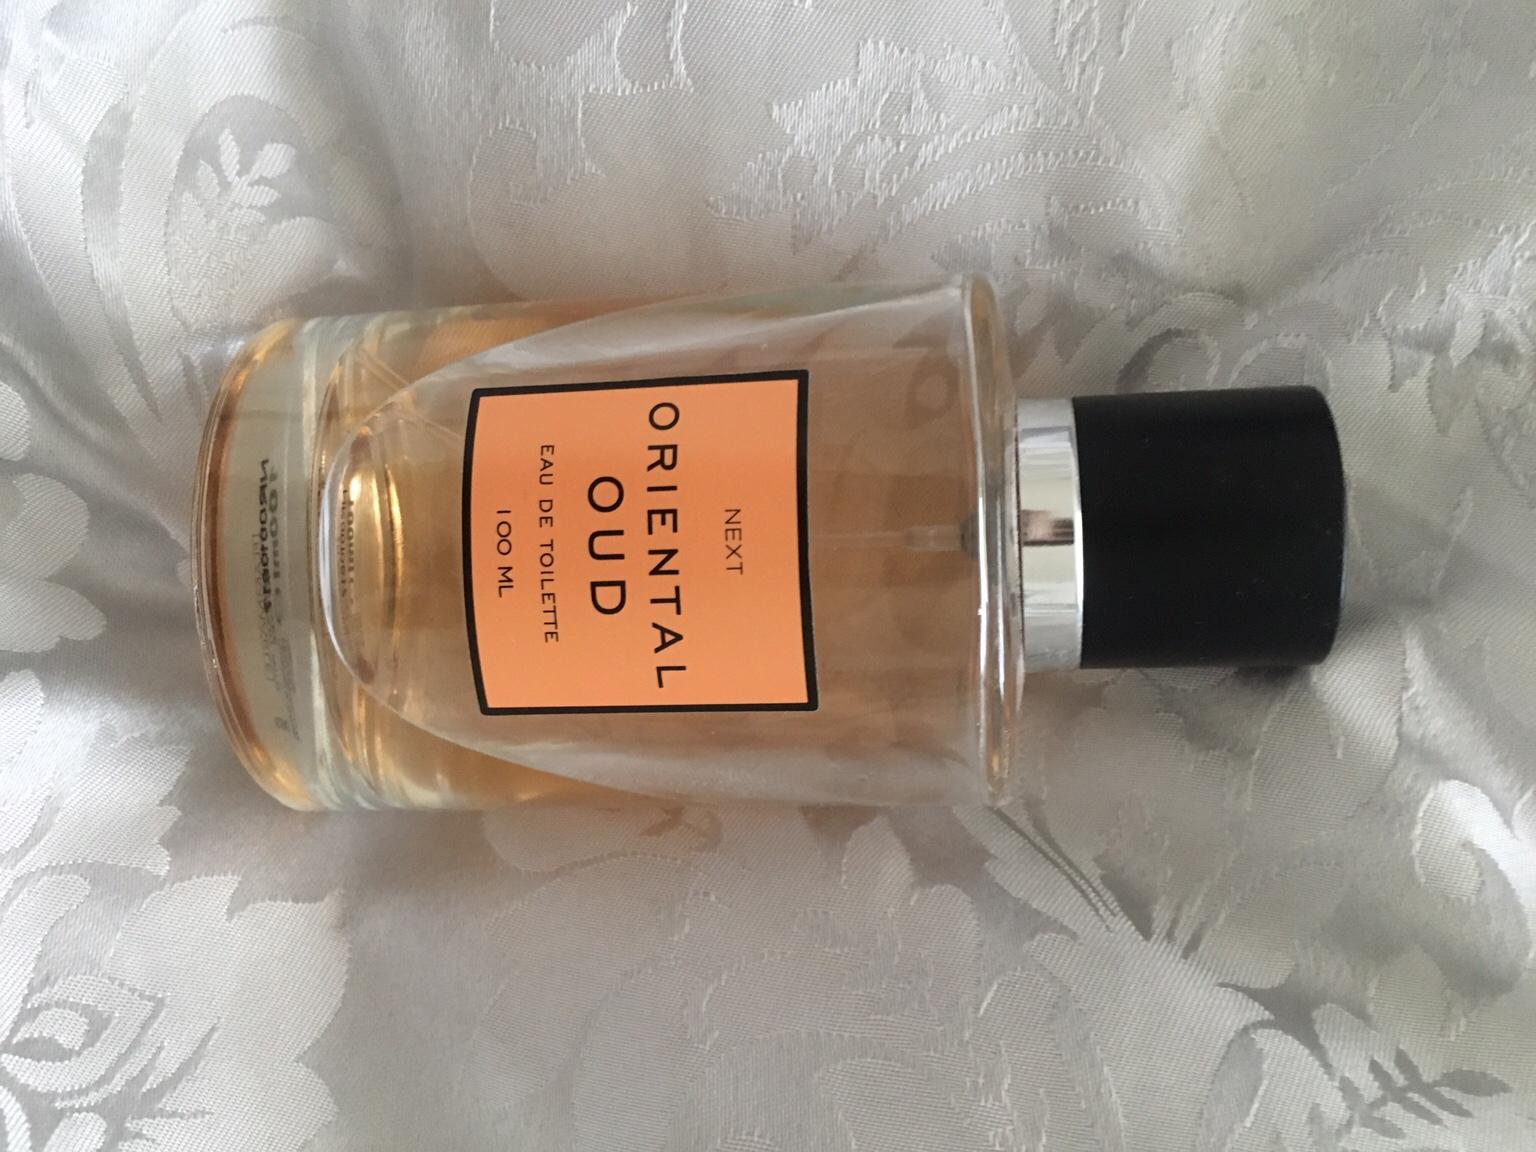 Next oud perfume in WS3 Walsall for £2 